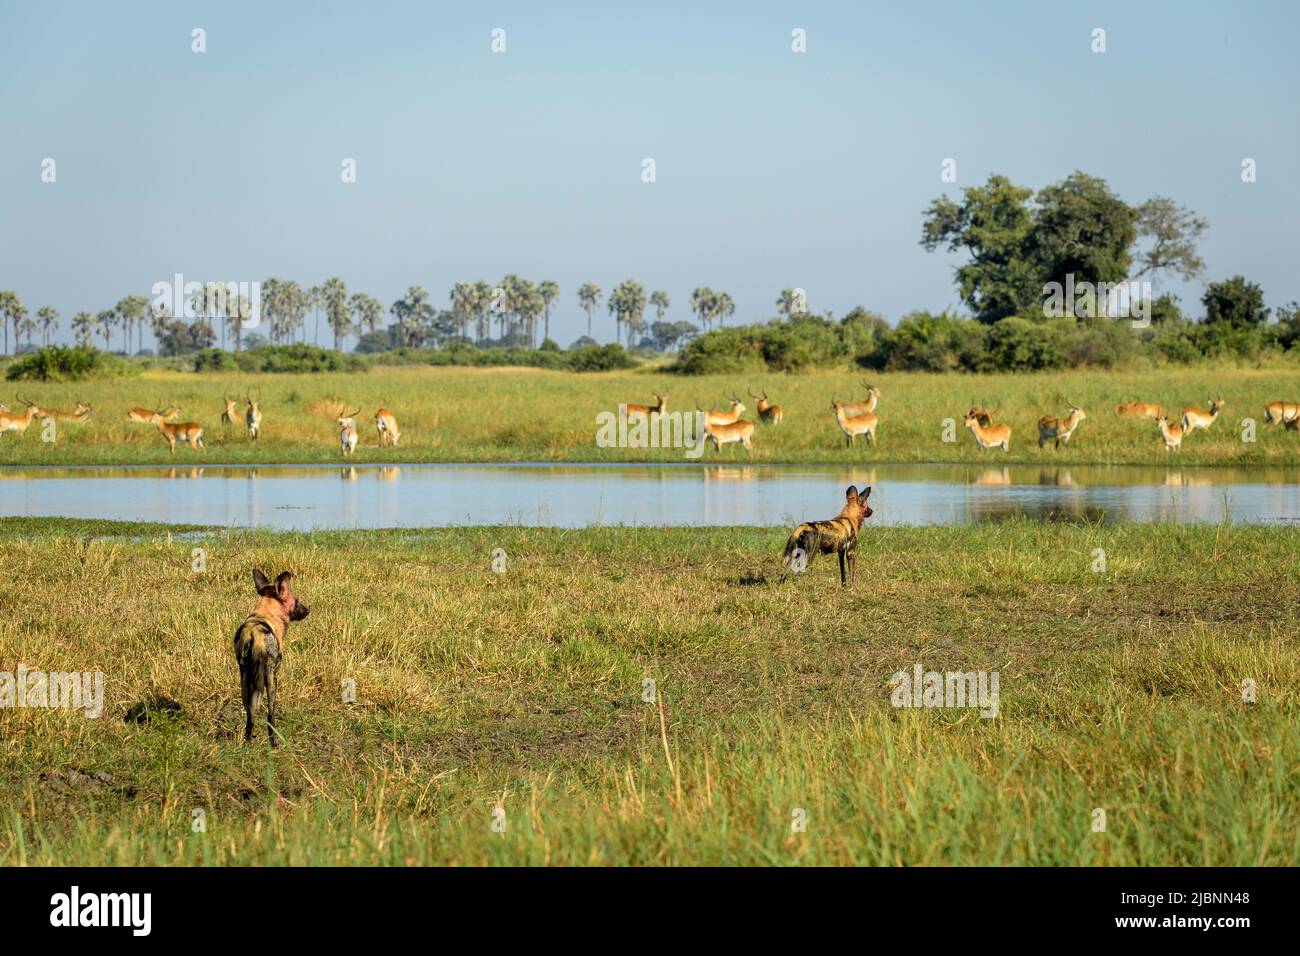 African Wild Dogs (Lycaon pictus) in the Okavango Delta, Botswana, staring  across a pond at Red Lechwe (Kobus leche) Stock Photo